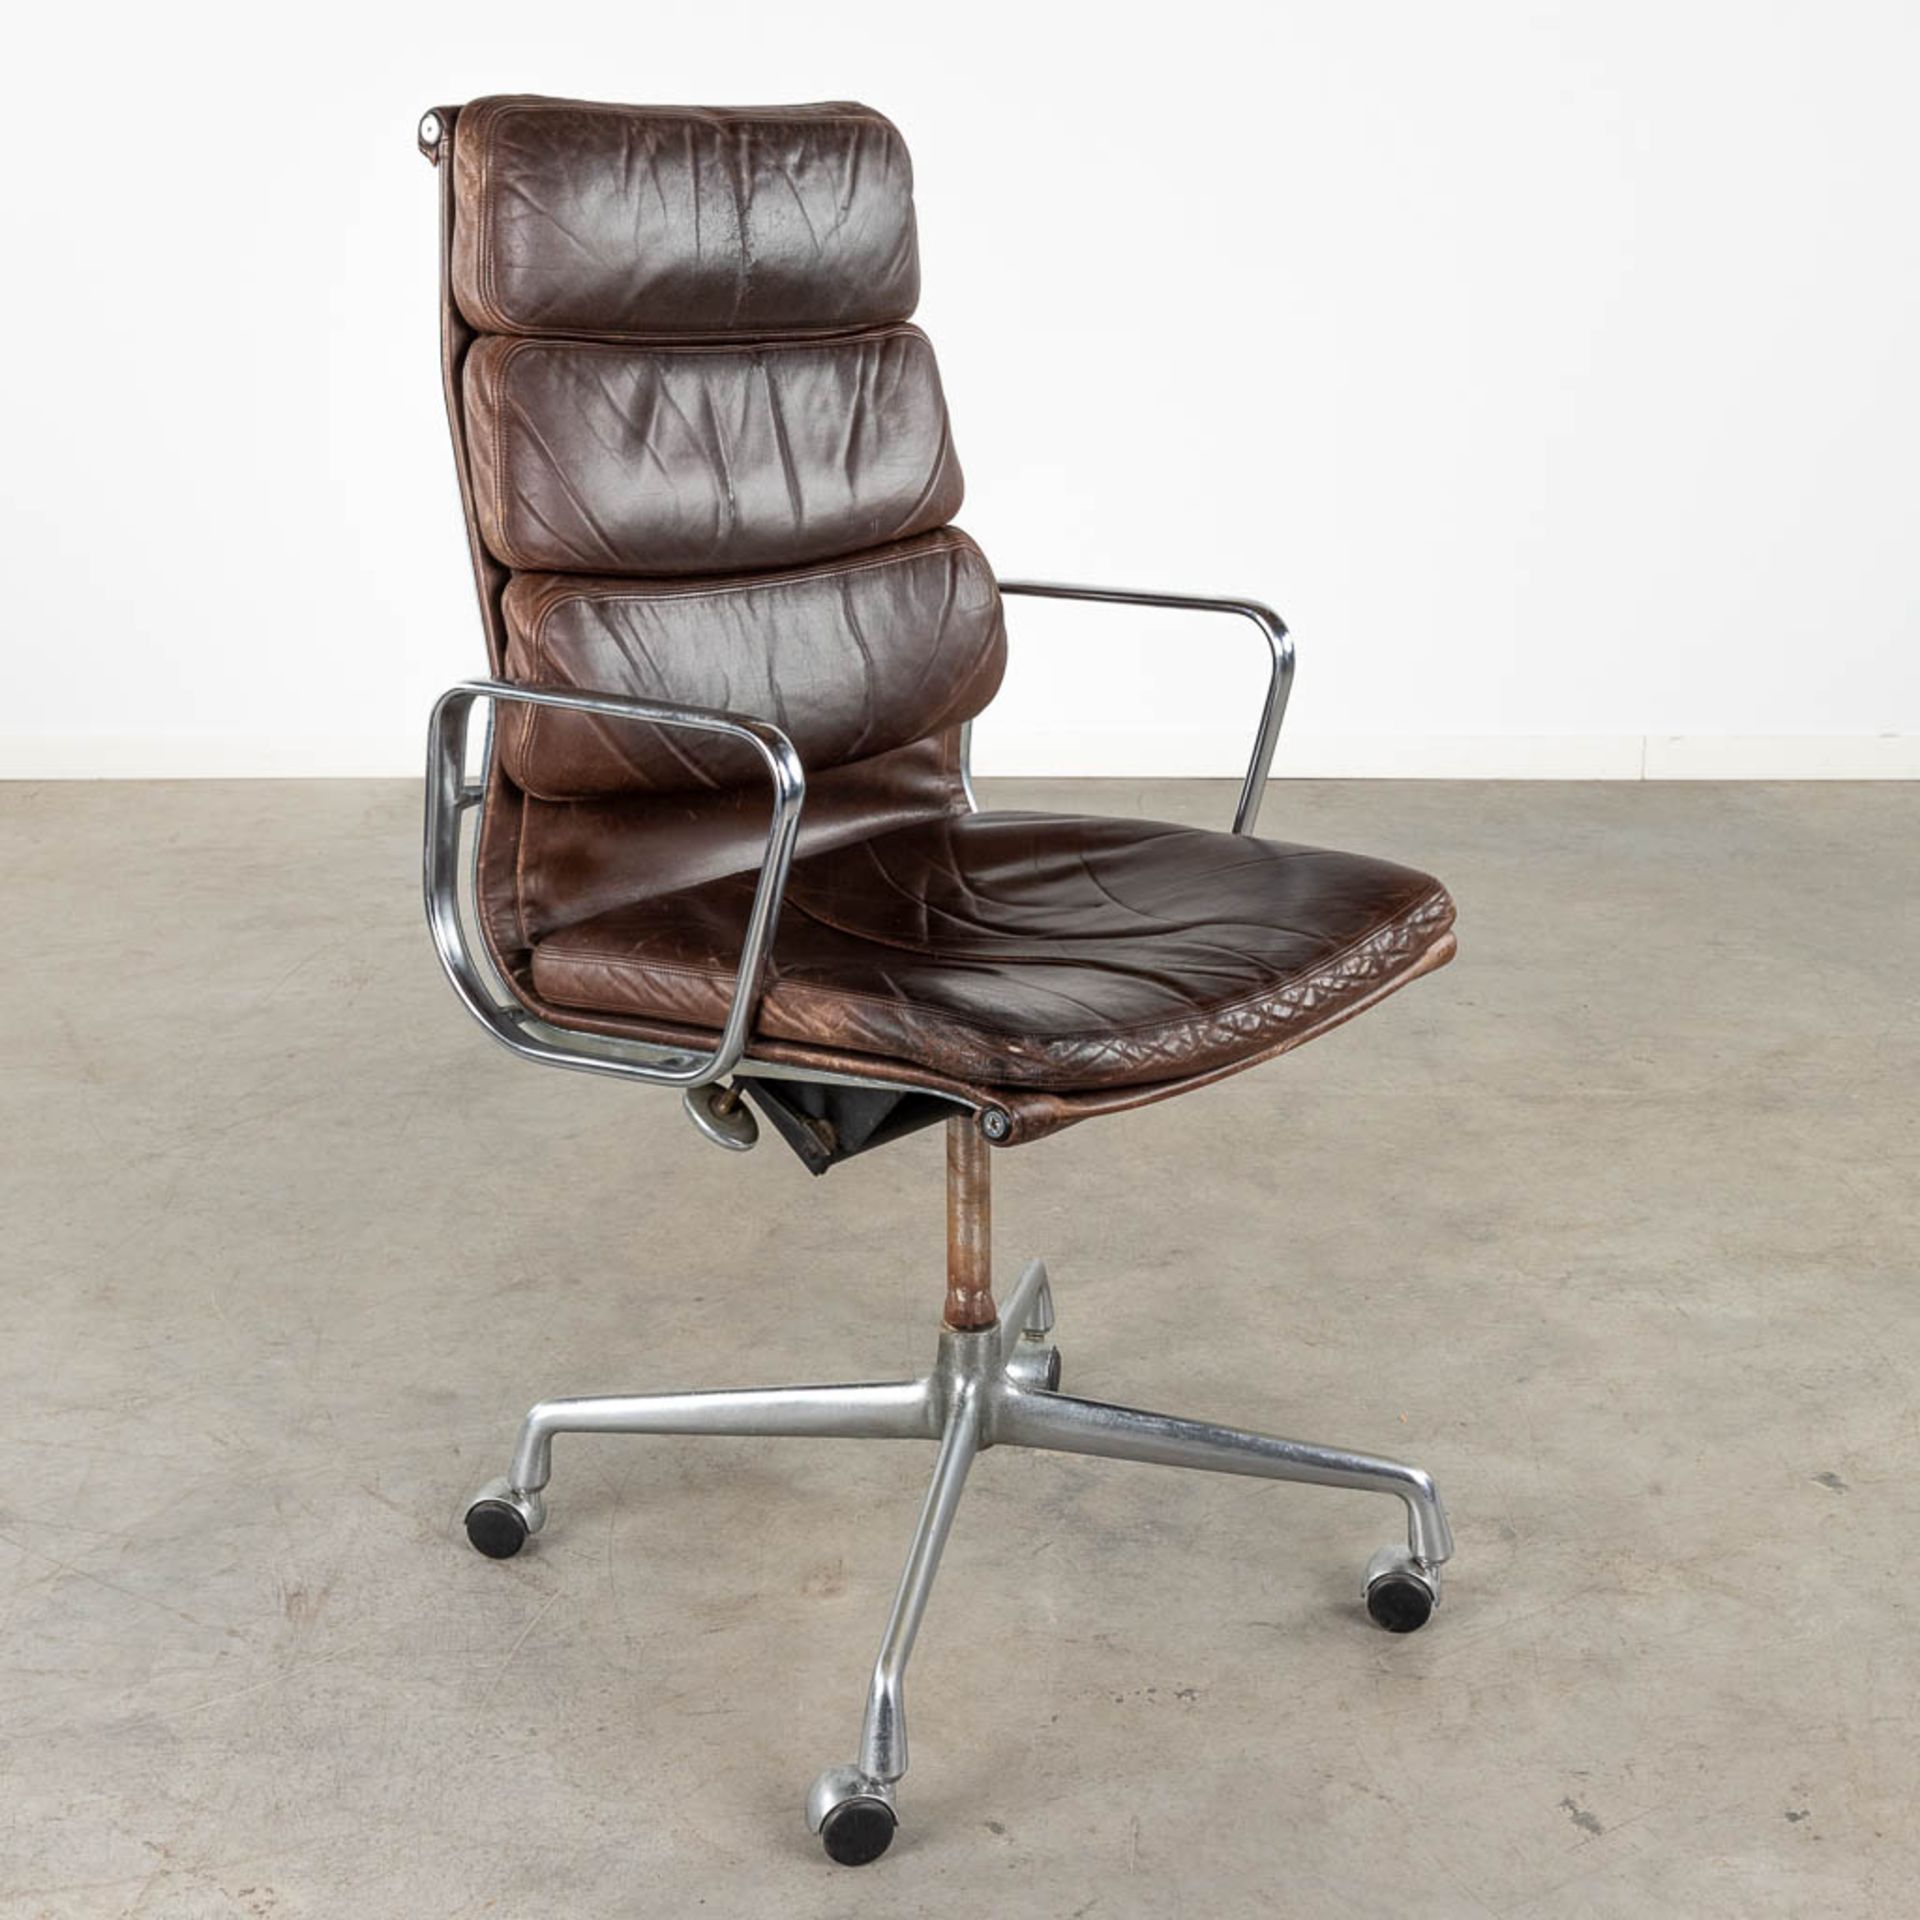 Charles & Ray EAMES (XX-XXI) 'Soft Pad Office Chair' for Herman Miller. (D:111 x W:59 x H:63 cm) (D: